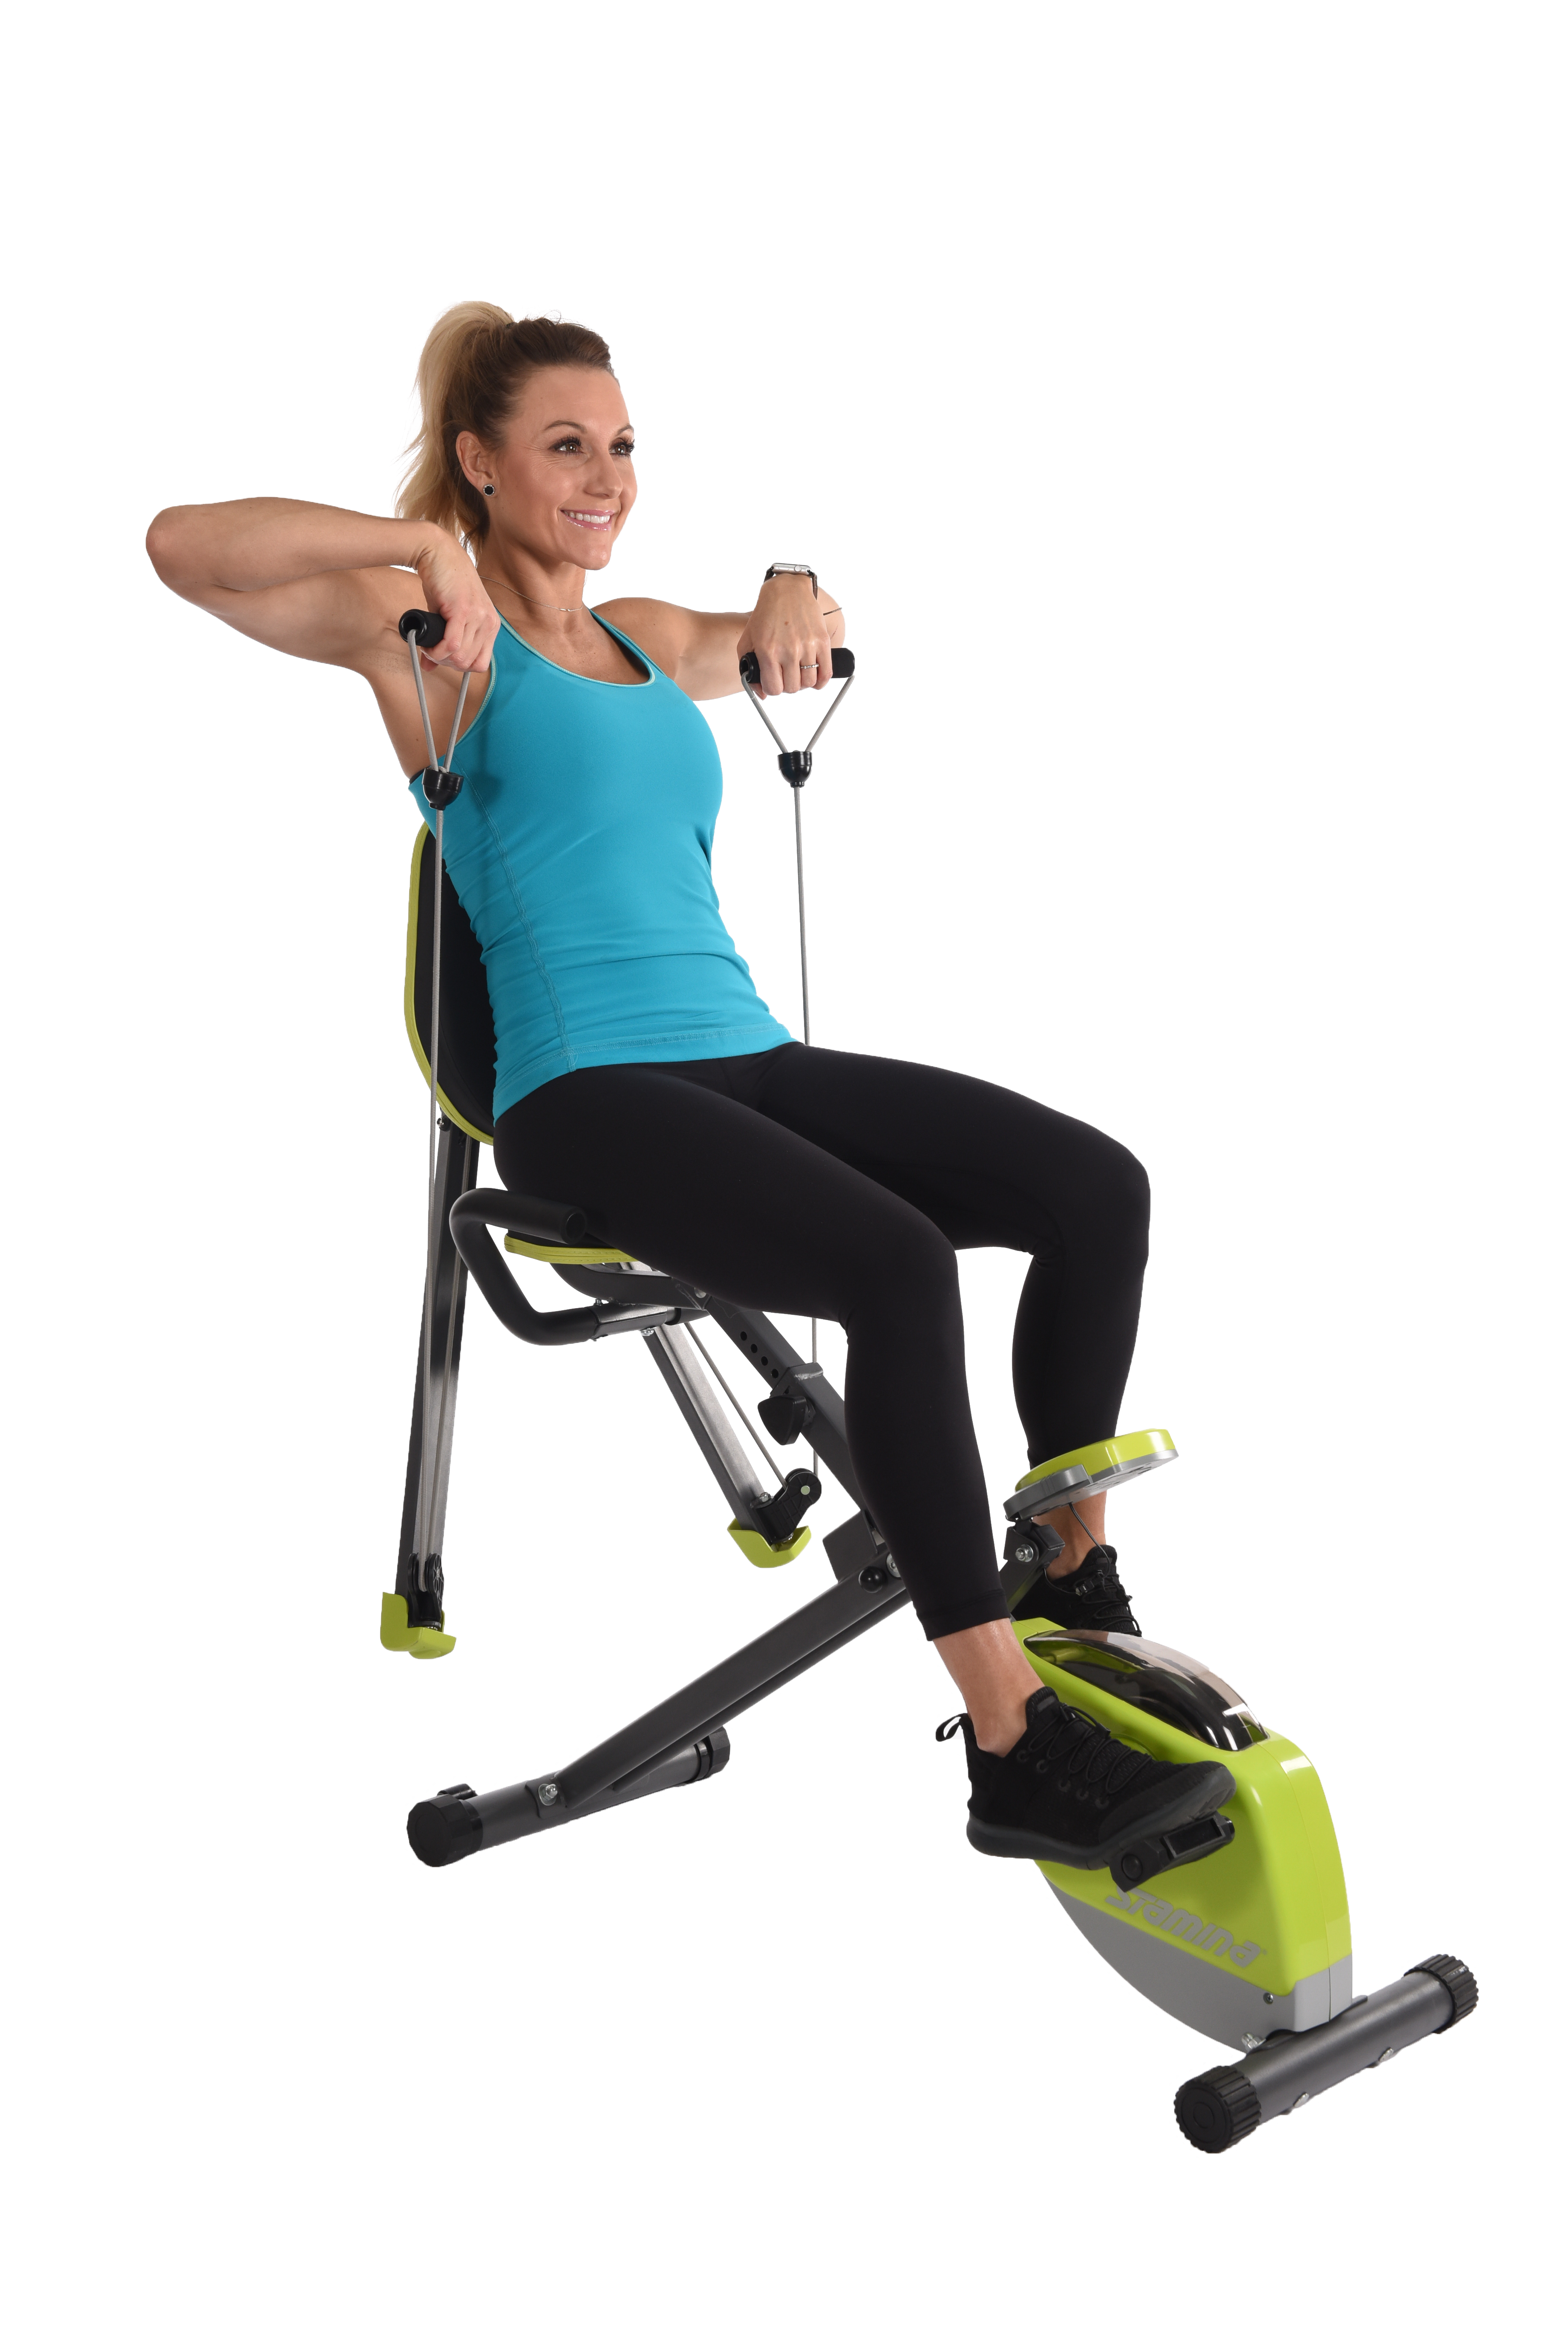 Performing high pulls on Stamina Wonder Exercise Bike With Strength System.